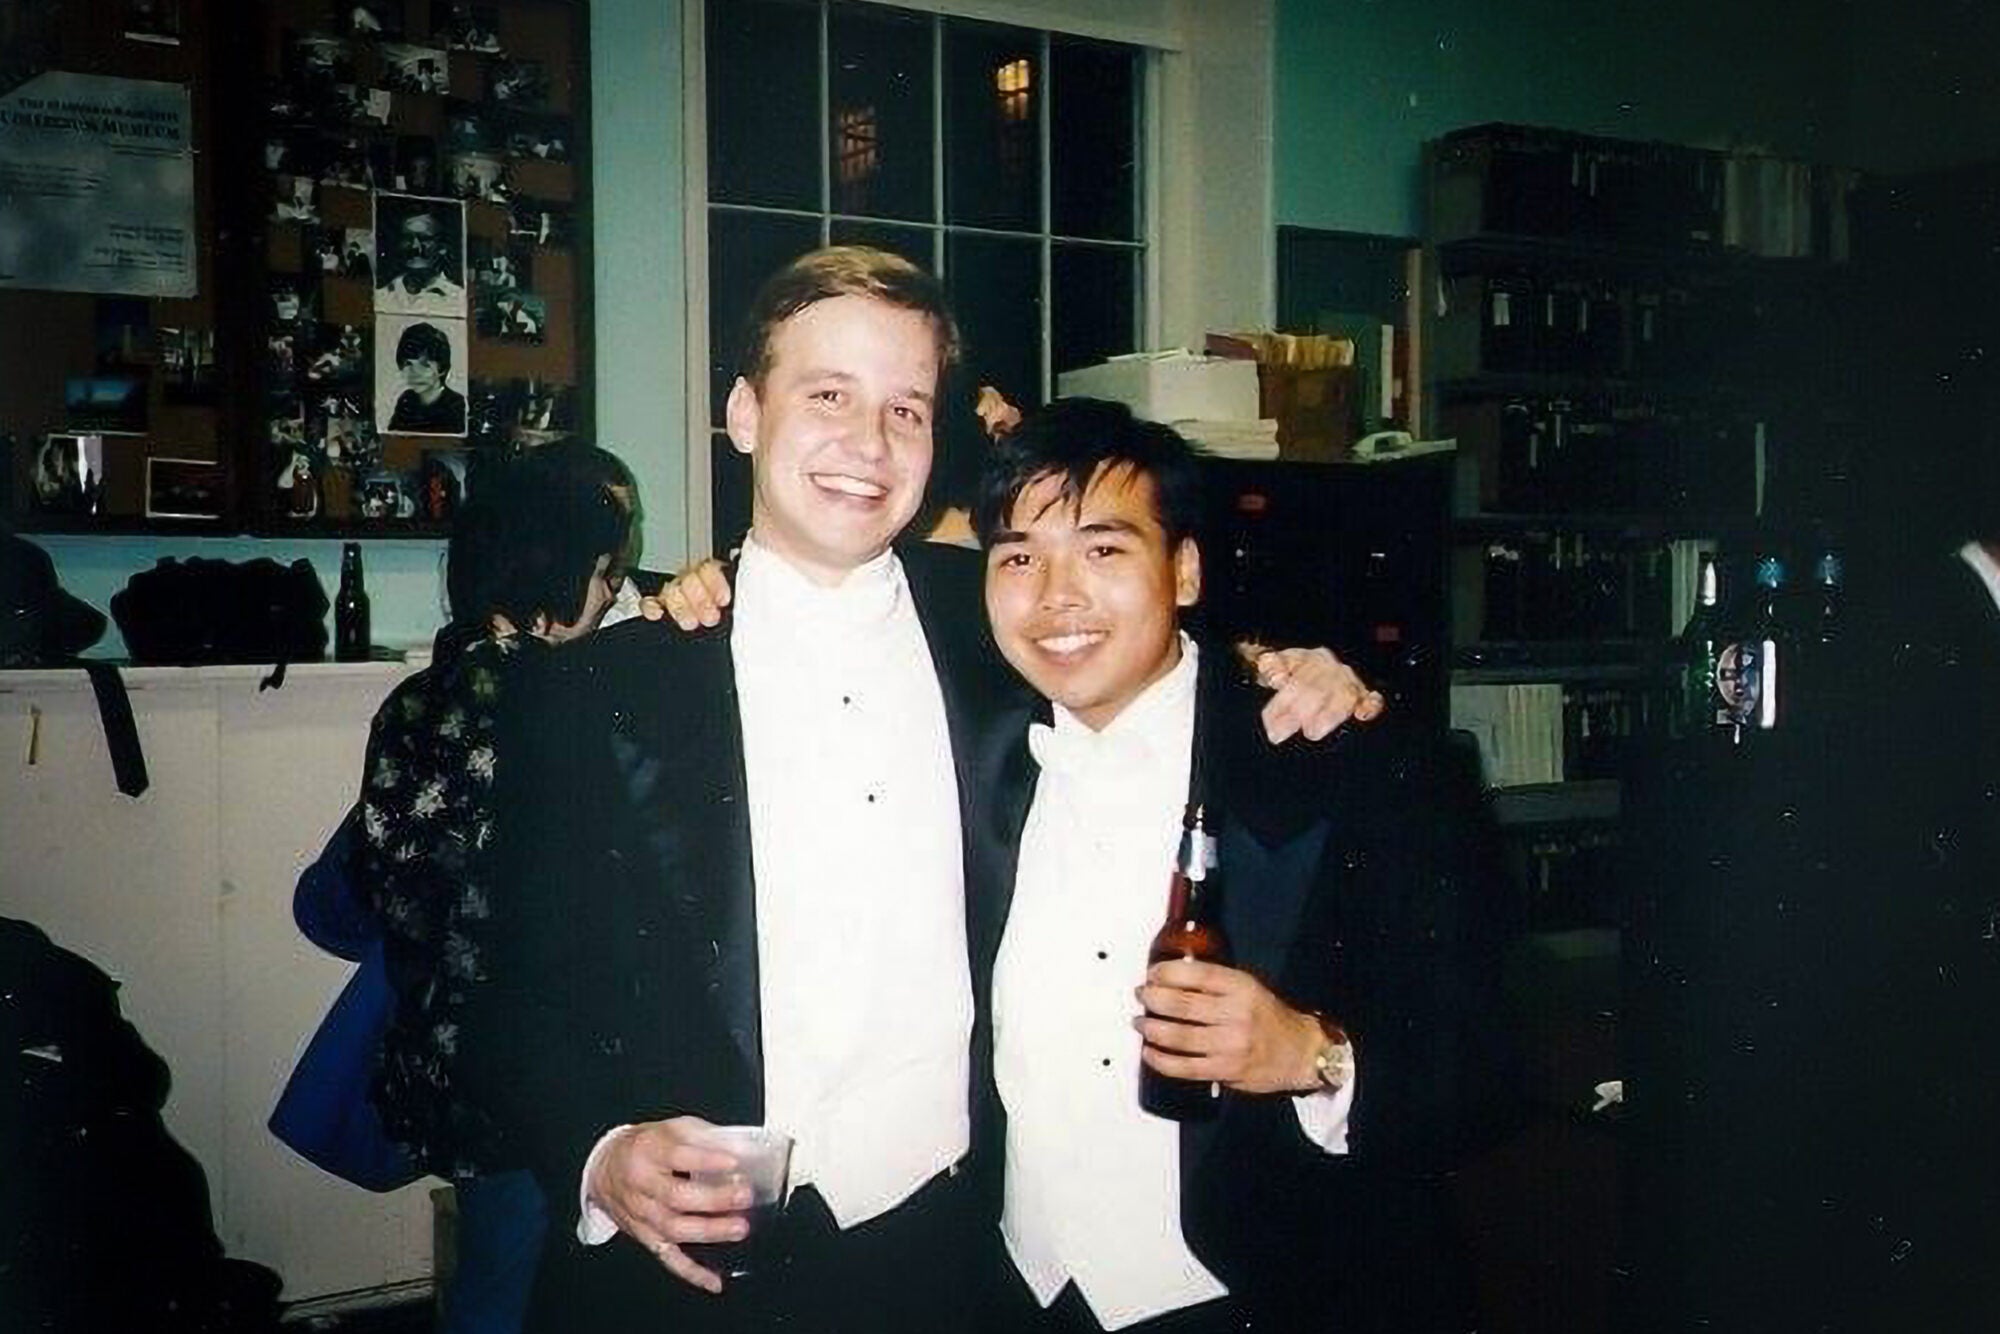 Two men wearing tuxedos pose for a photo